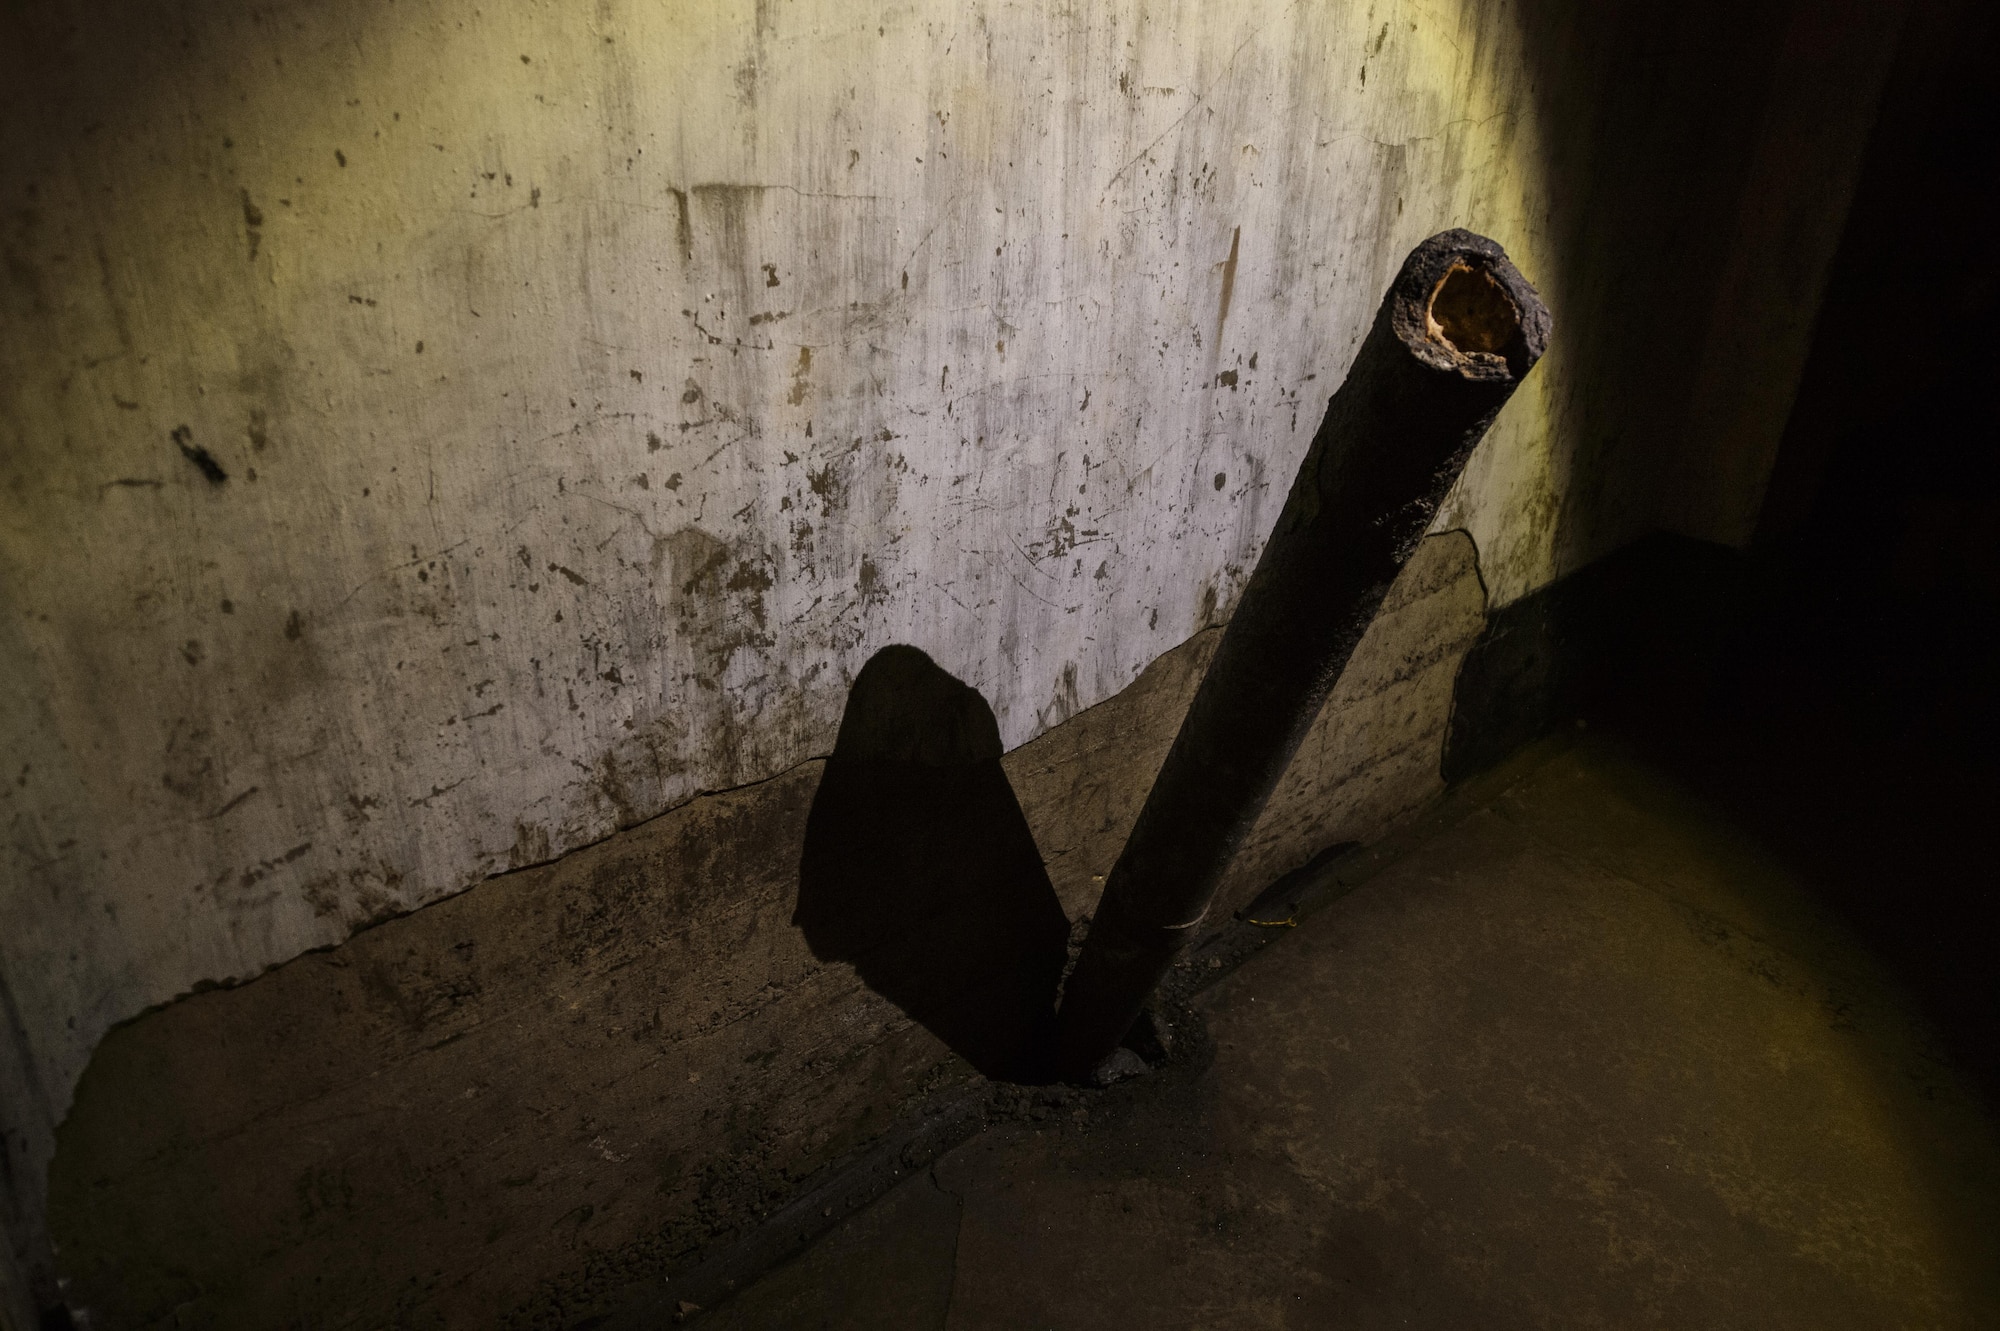 A Roschling shell sticks out of a bunker floor at Fort Aubin-Neufchateau, Belgium, Aug. 28, 2016. Enemy forces used the captured bunker to test their top secret bunker-busting Roschling shell. (U.S. Air Force photo by Staff Sgt. Jonathan Snyder/Released)